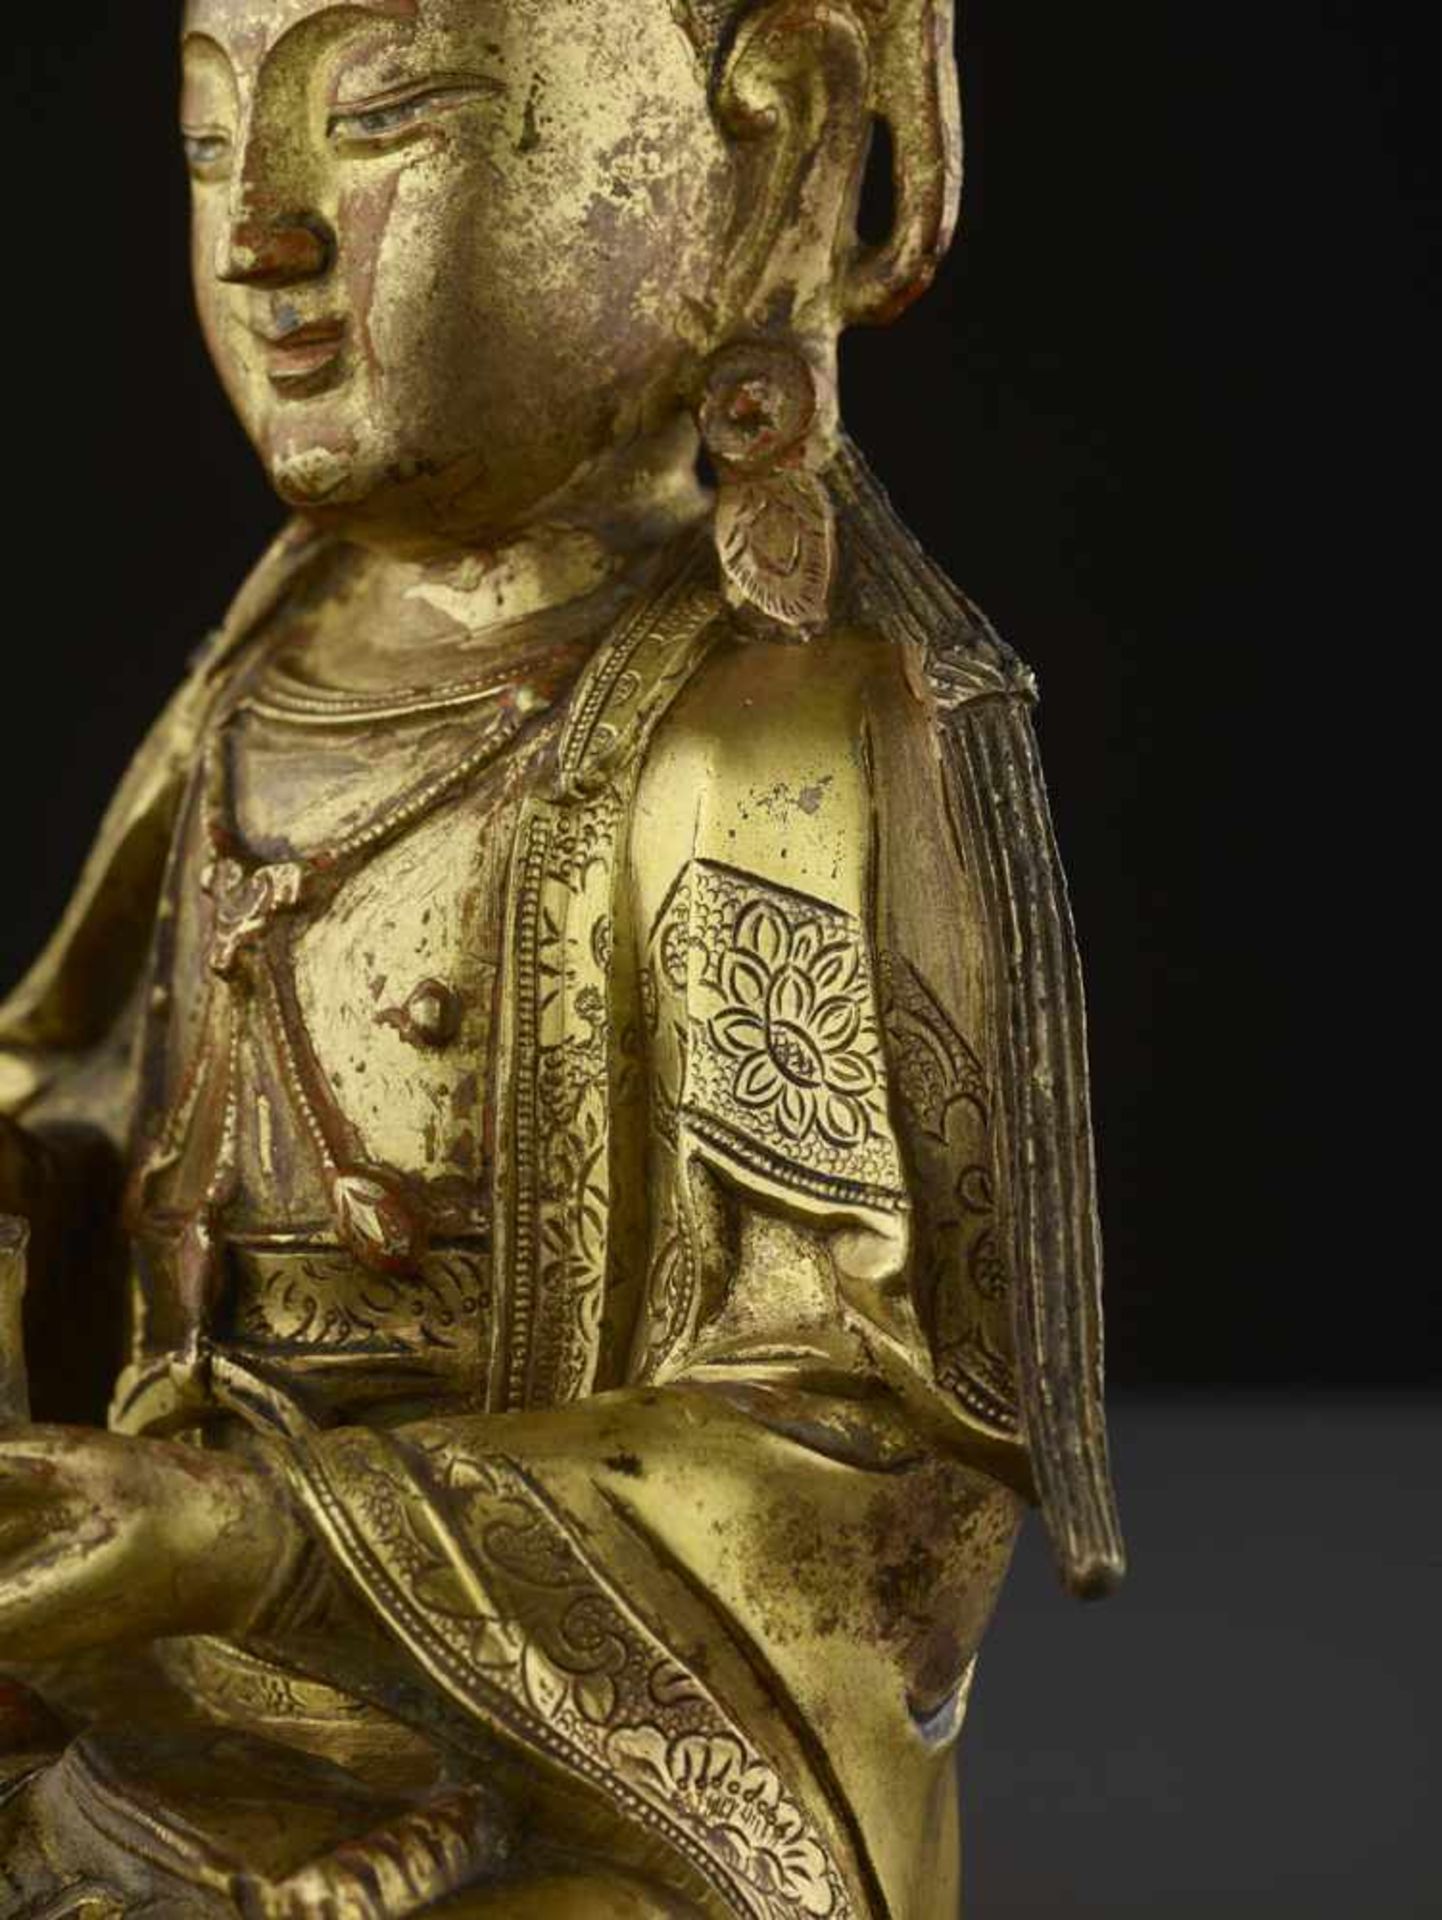 A FINELY CAST GILT-BRONZE FIGURE OF GUANYIN, MING DYNASTY China, 16th-17th century. The figure is - Image 5 of 10